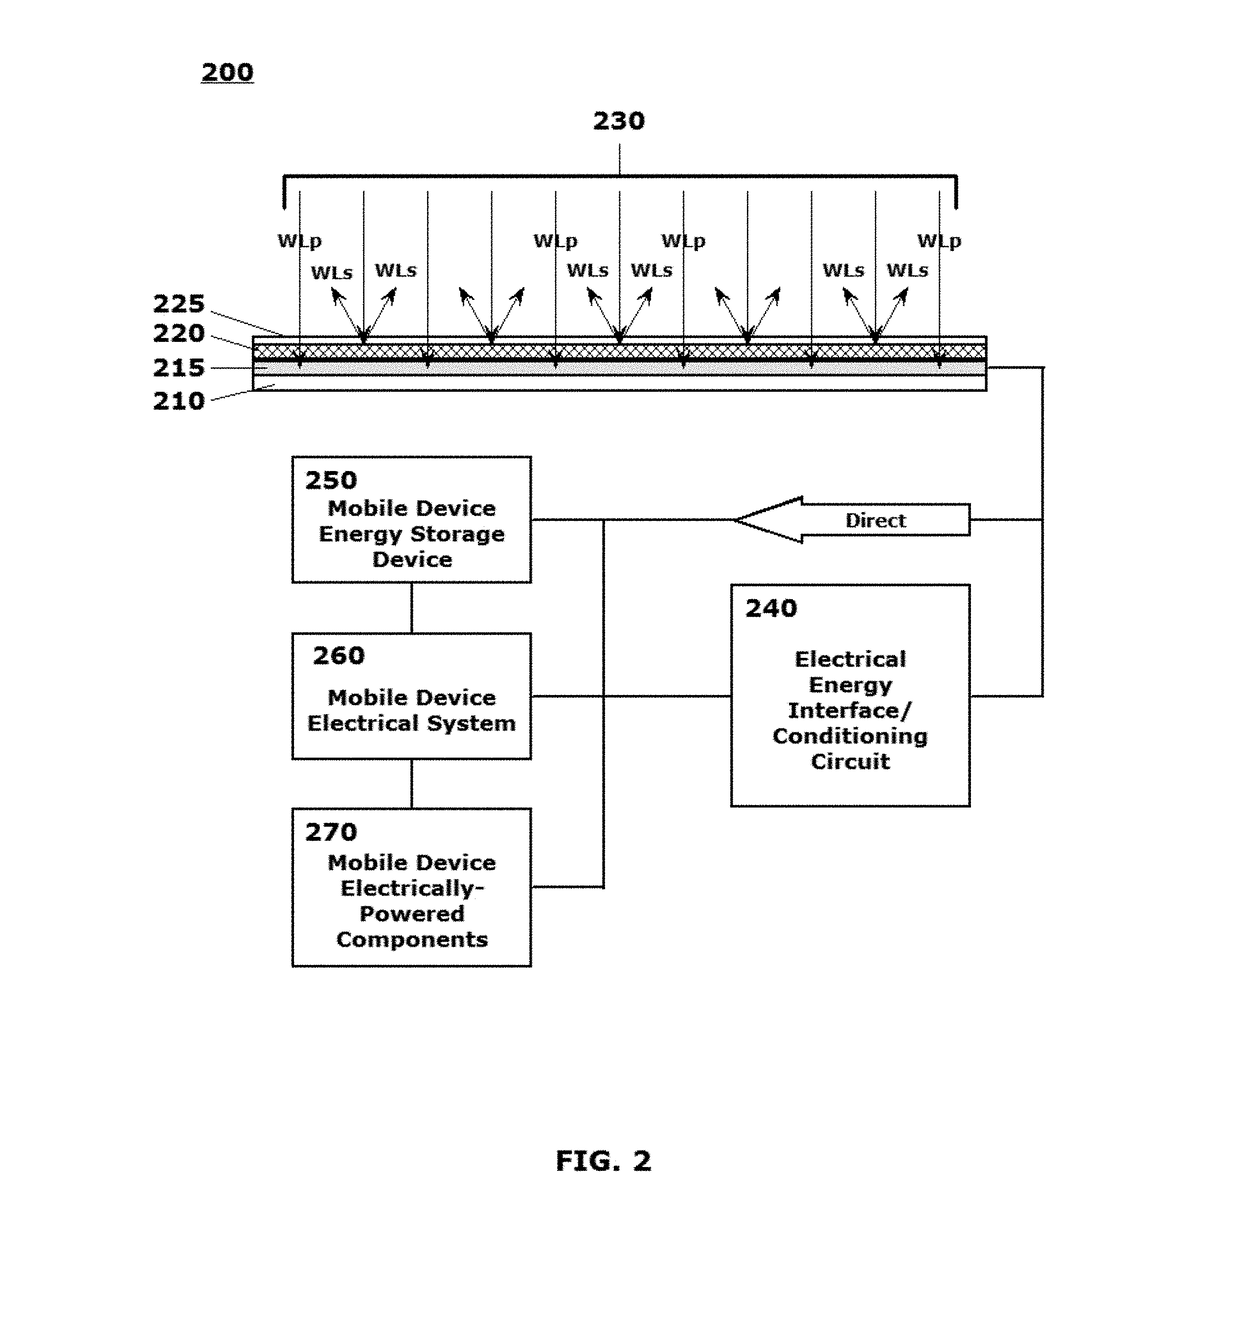 Energy harvesting systems for providing autonomous electrical power to mobile devices